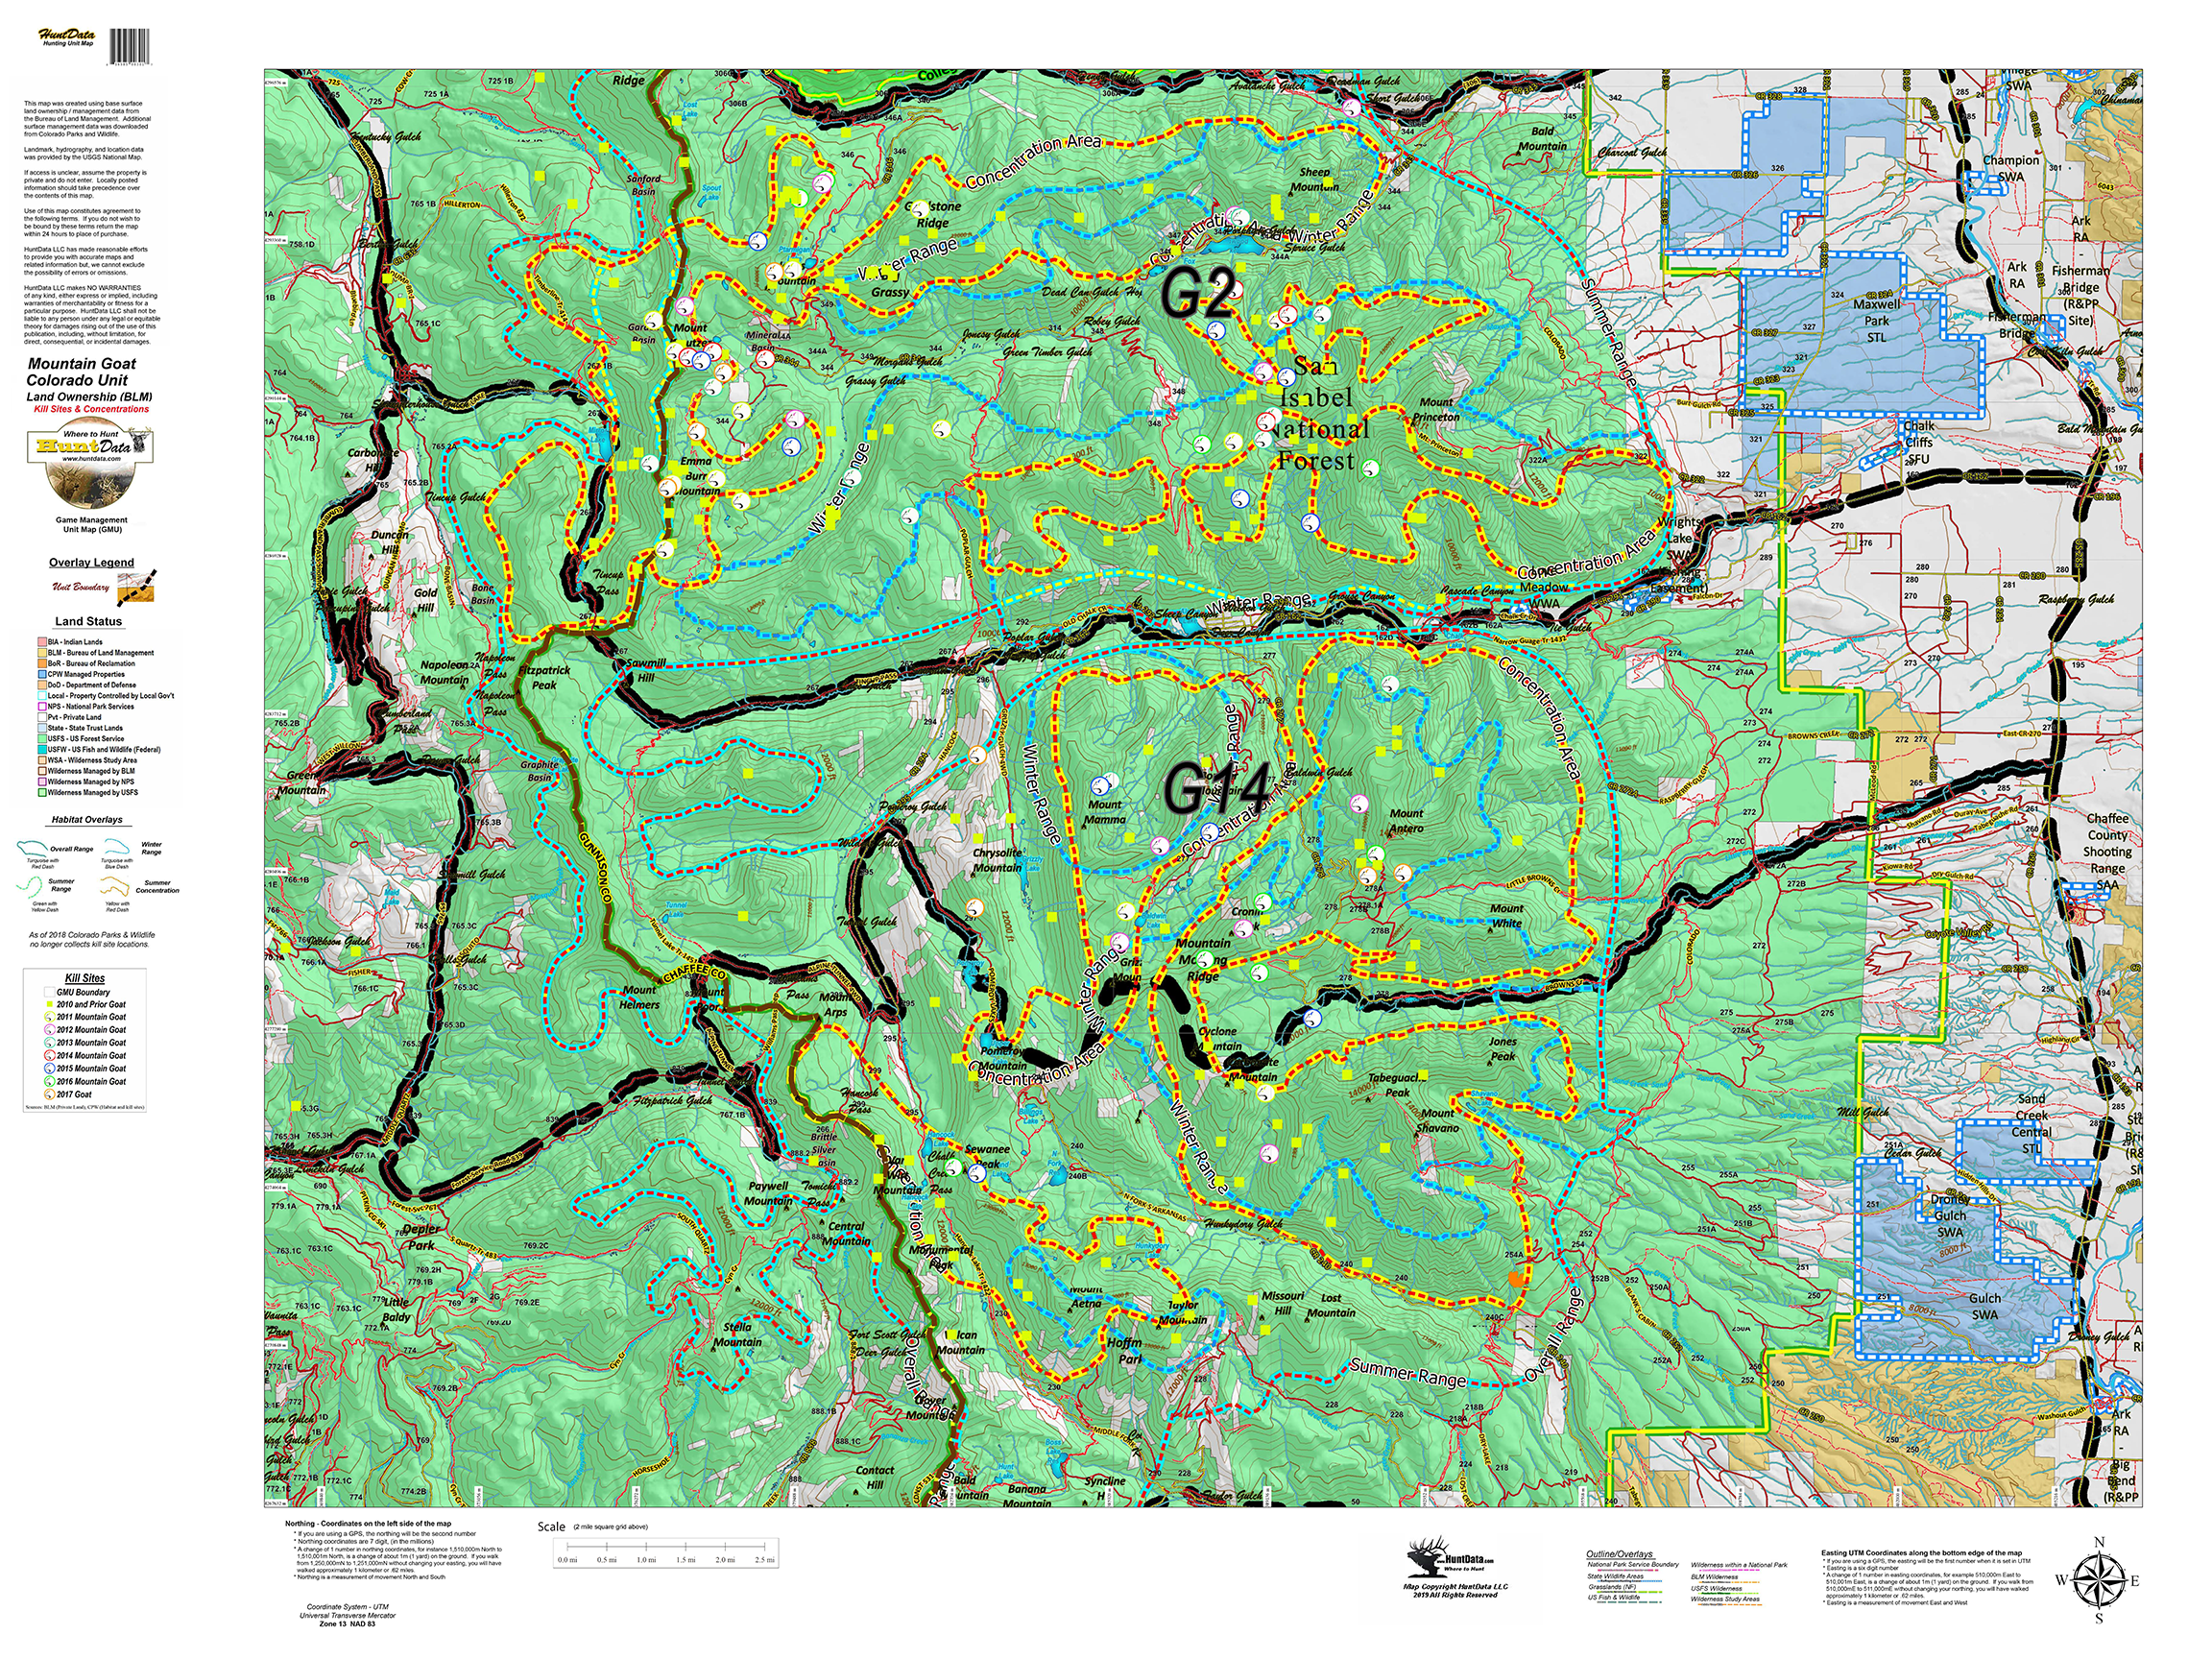 CO Mountain Goat Kill Sites with Land Ownershp and Concentration